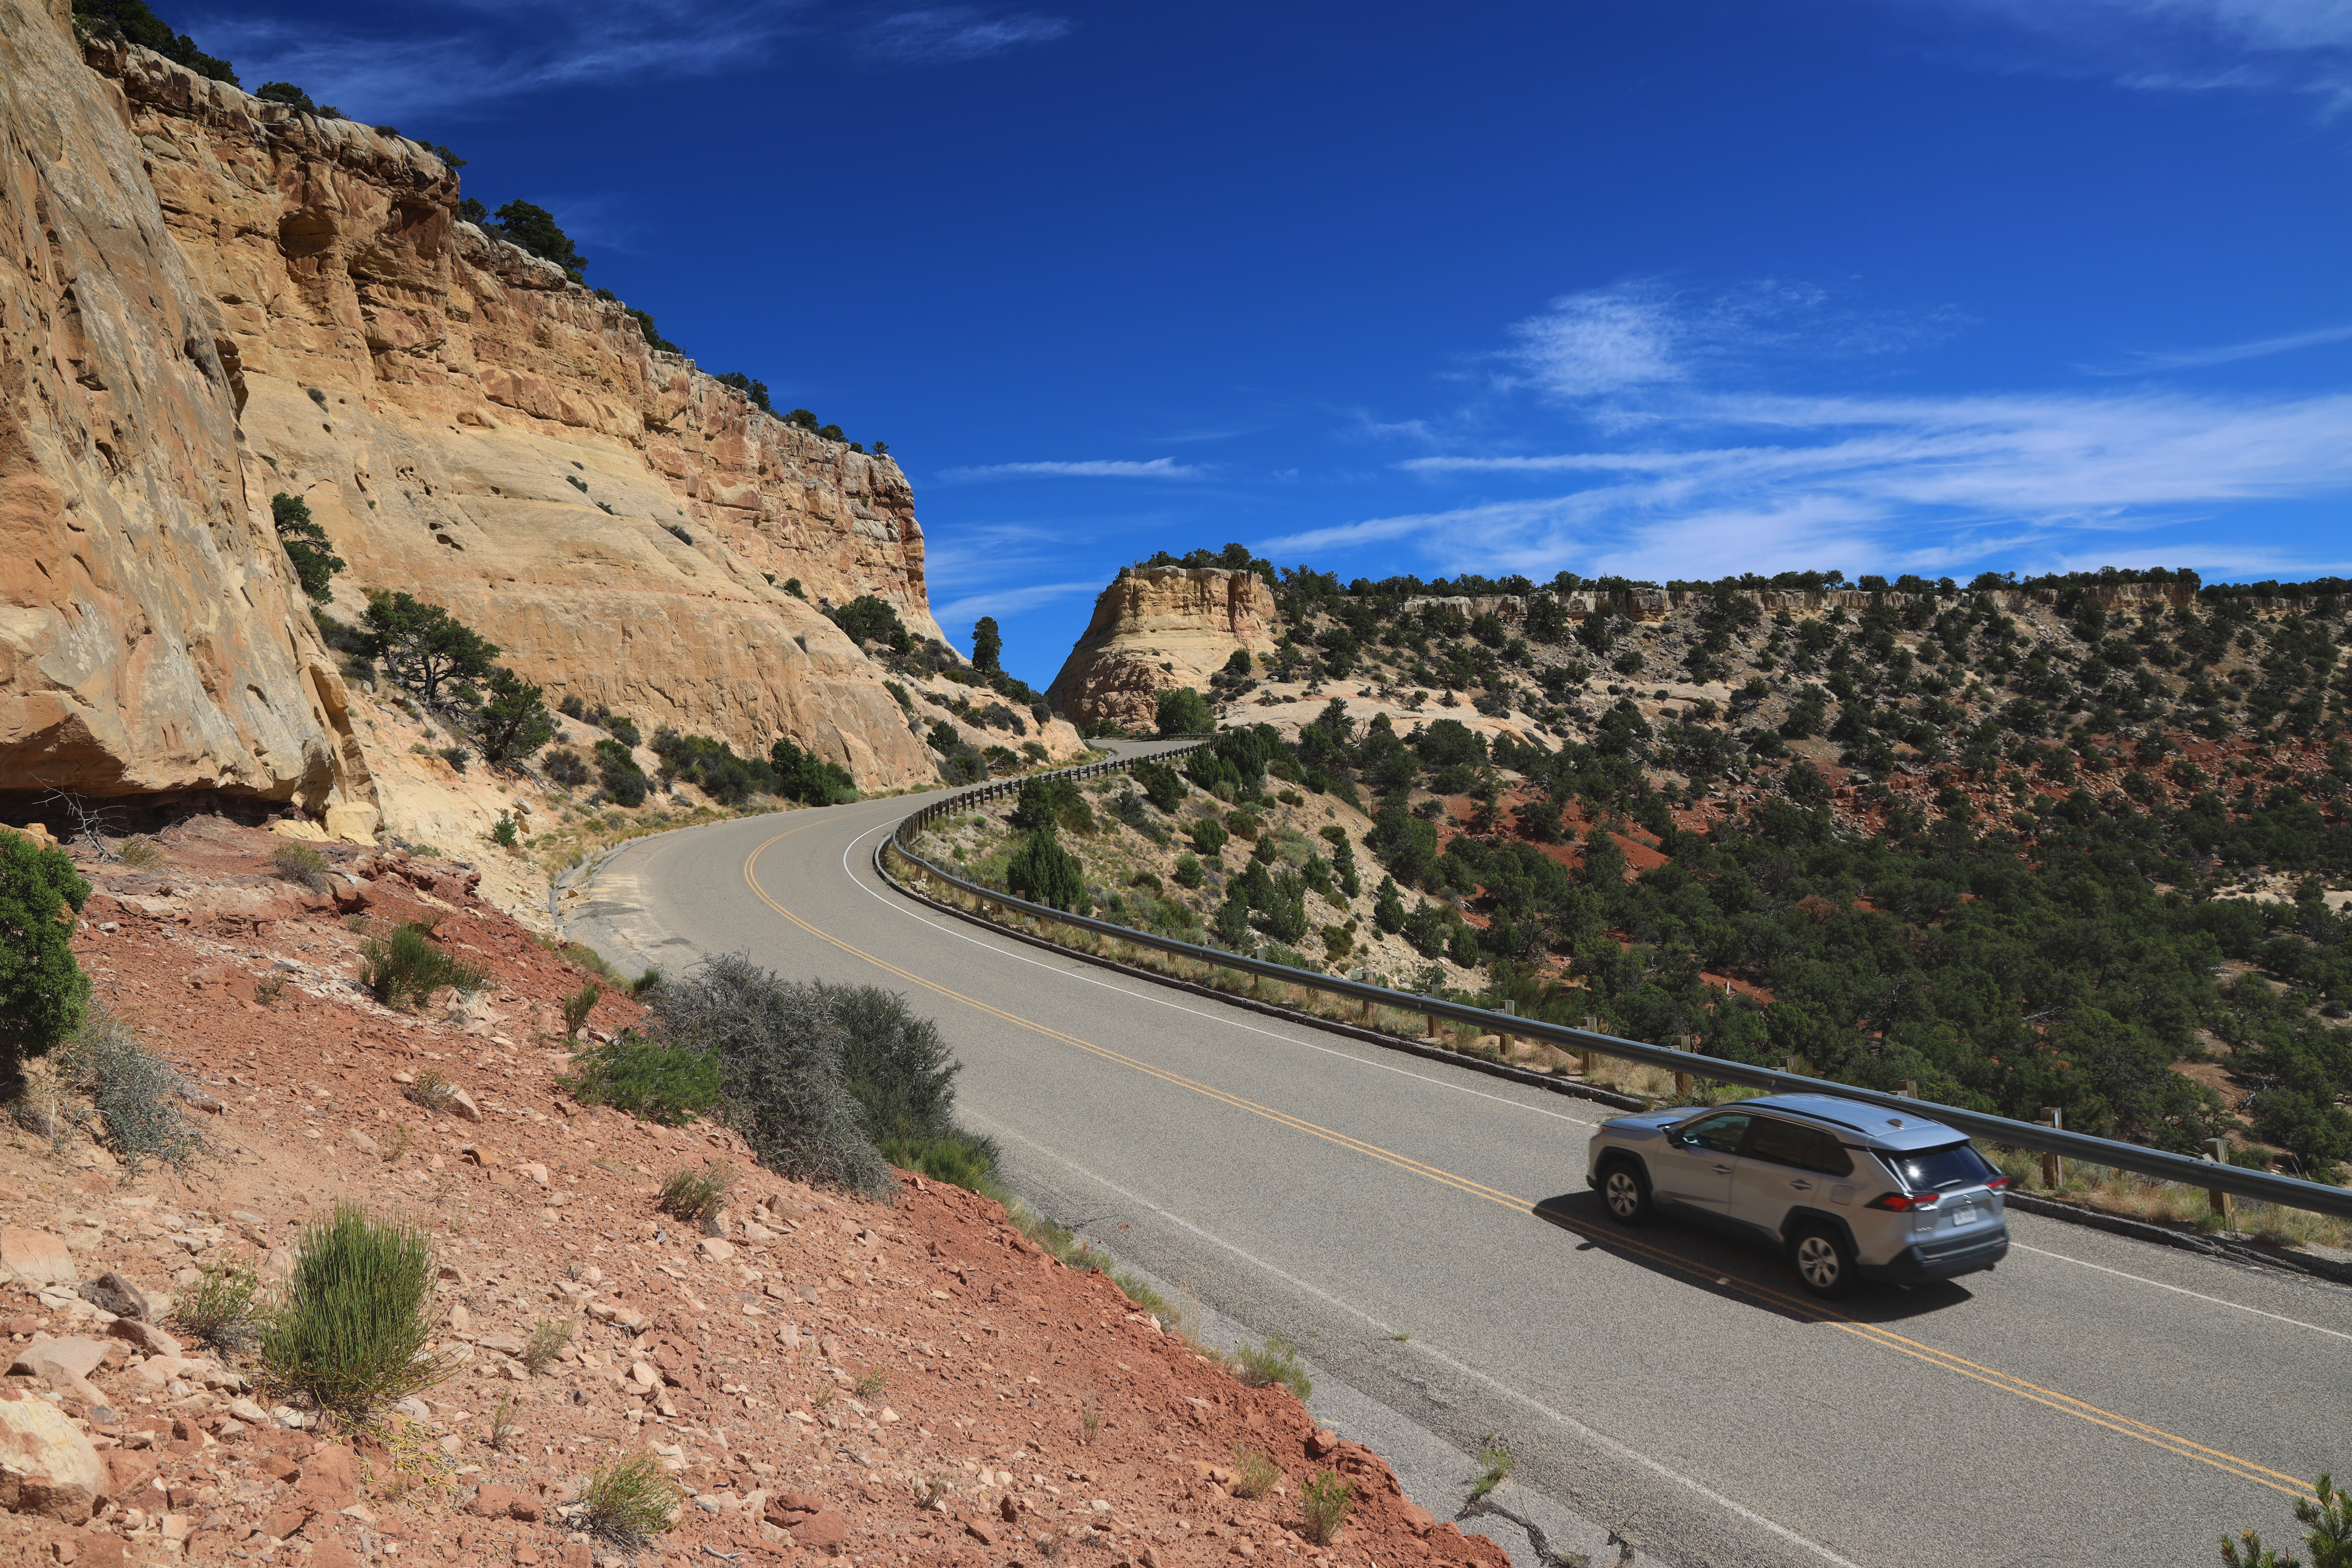 A silver vehicle drives on a road through color cliffs.